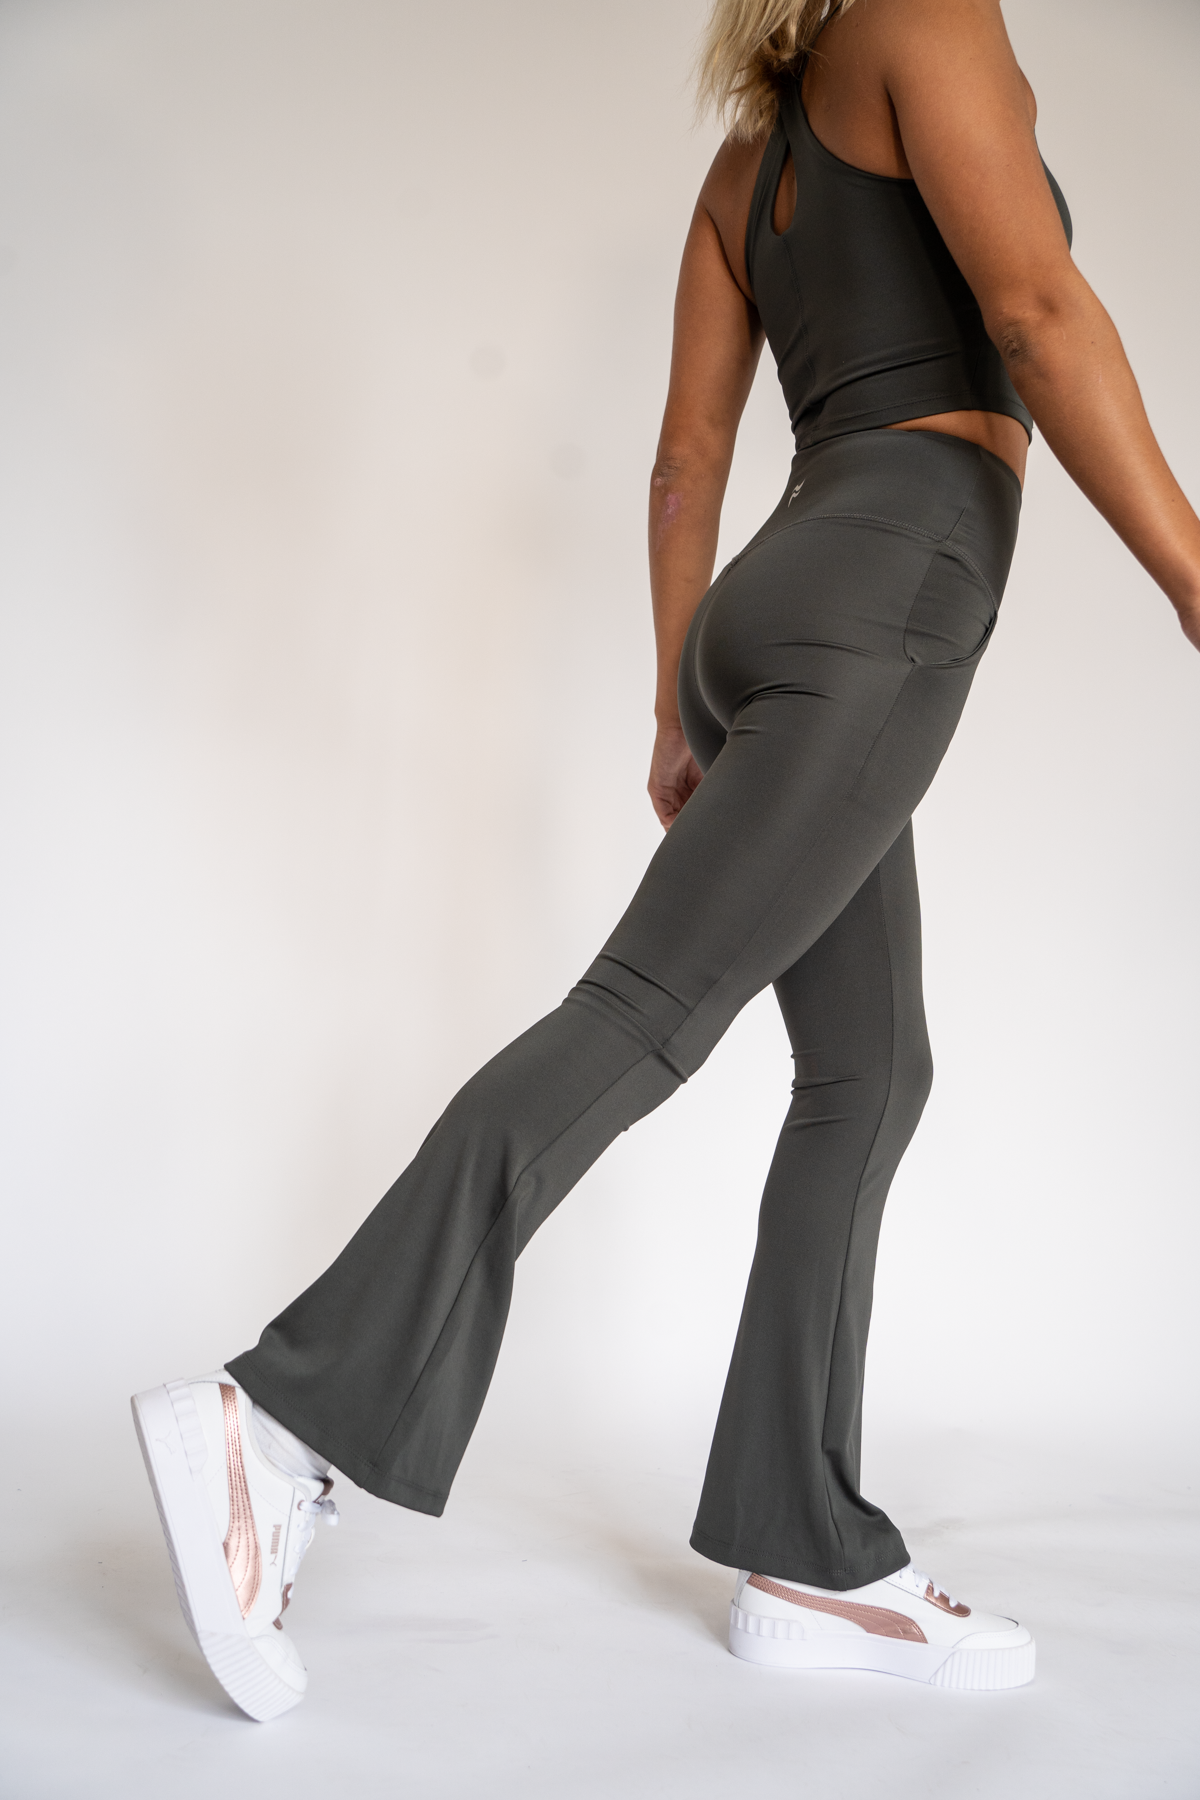 10 Best Sustainable Bell Bottoms And Flare Leggings